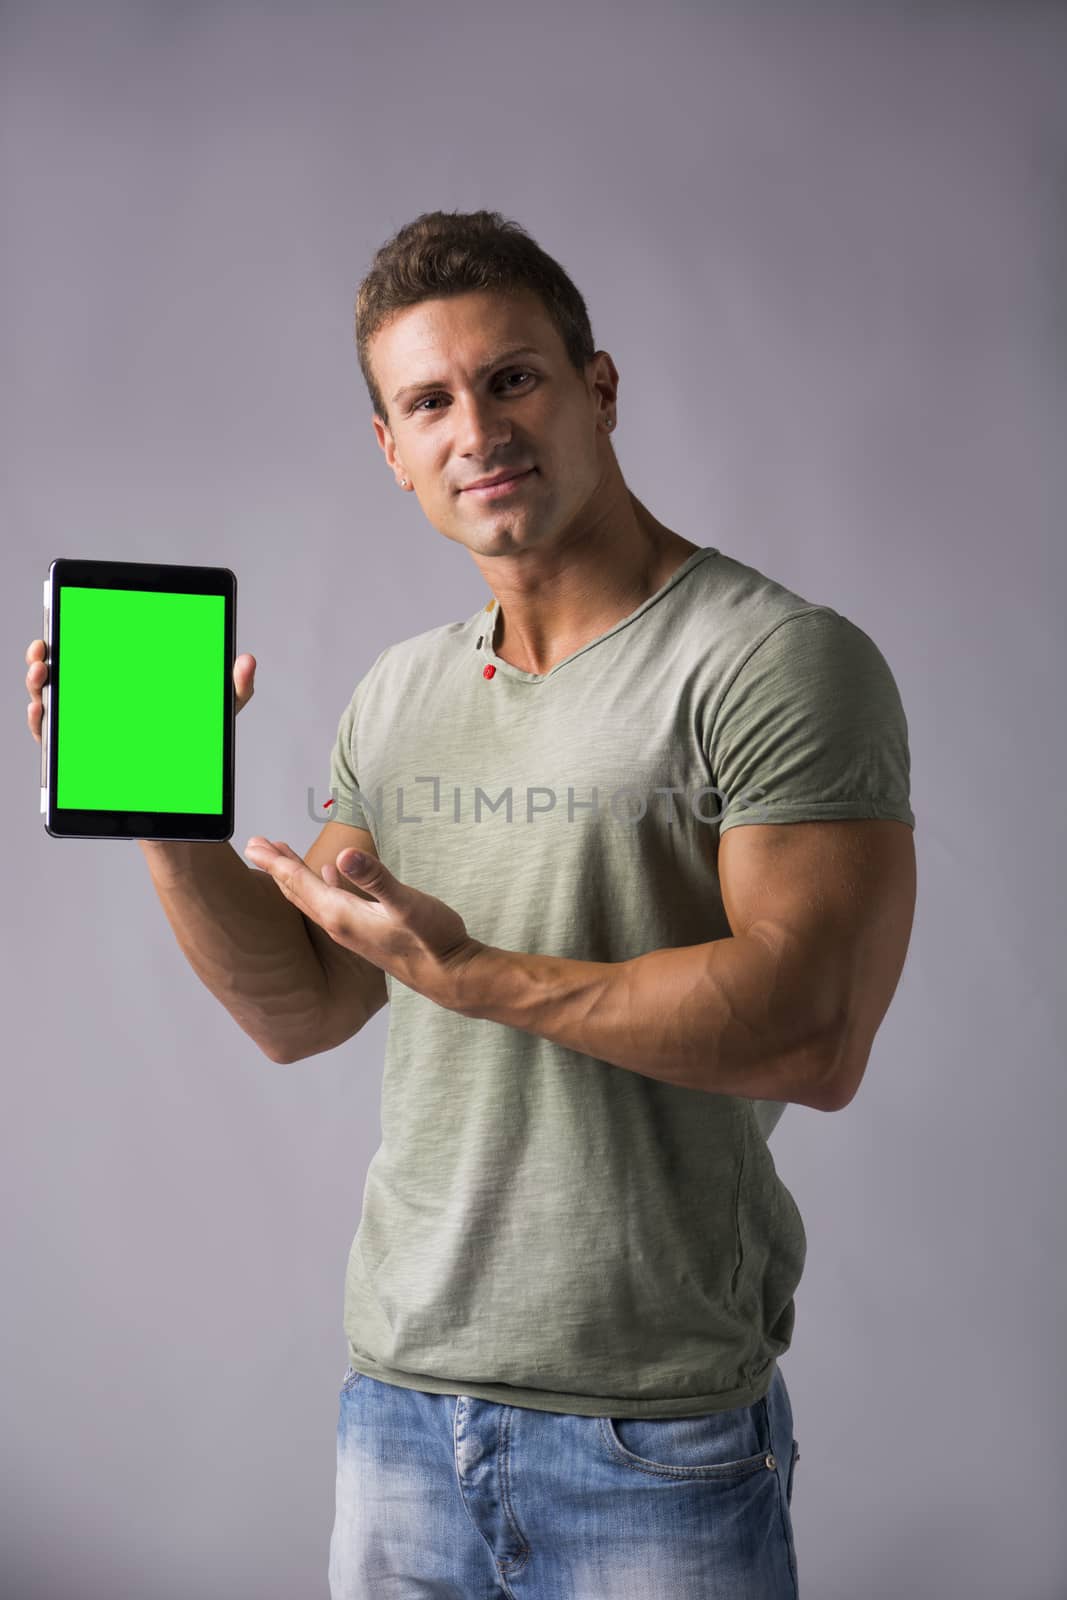 Attractive young man holding ebook reader or tablet PC by artofphoto